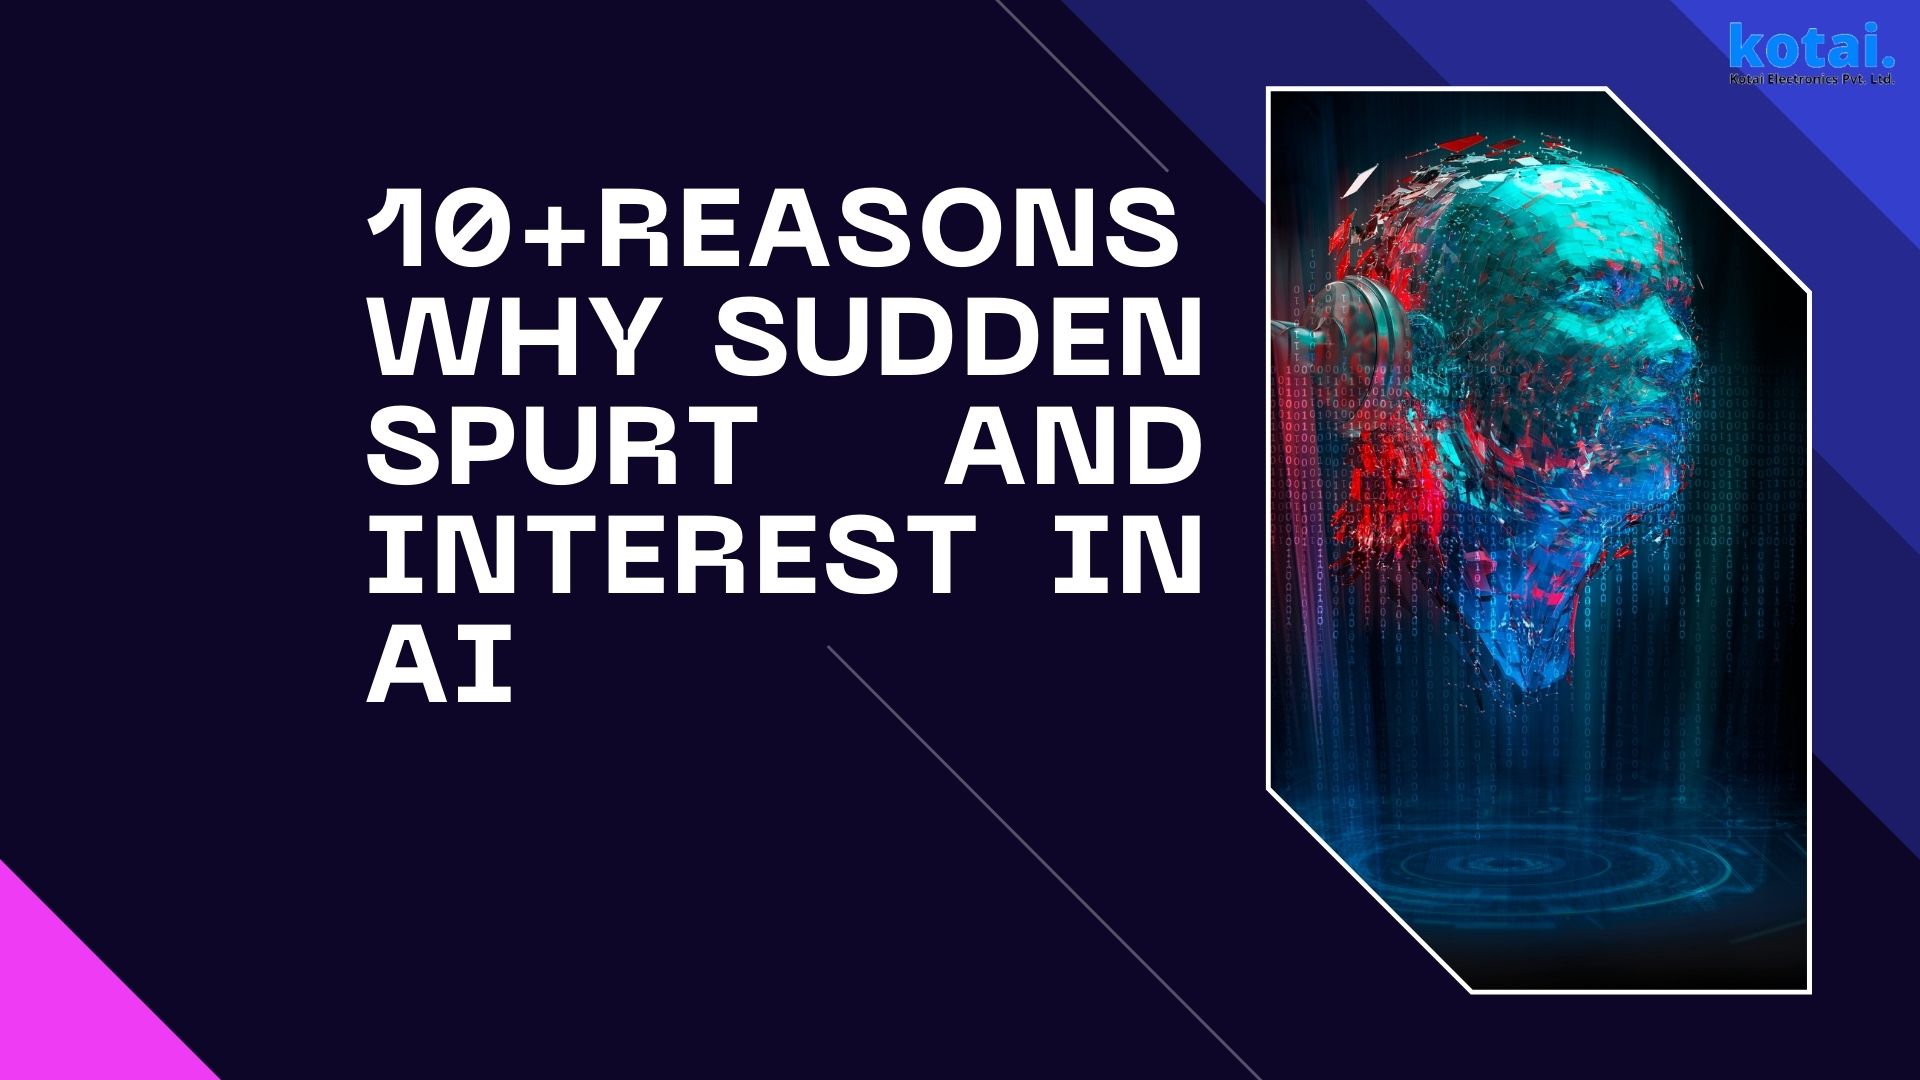 Why Sudden Spurt and Interest in AI